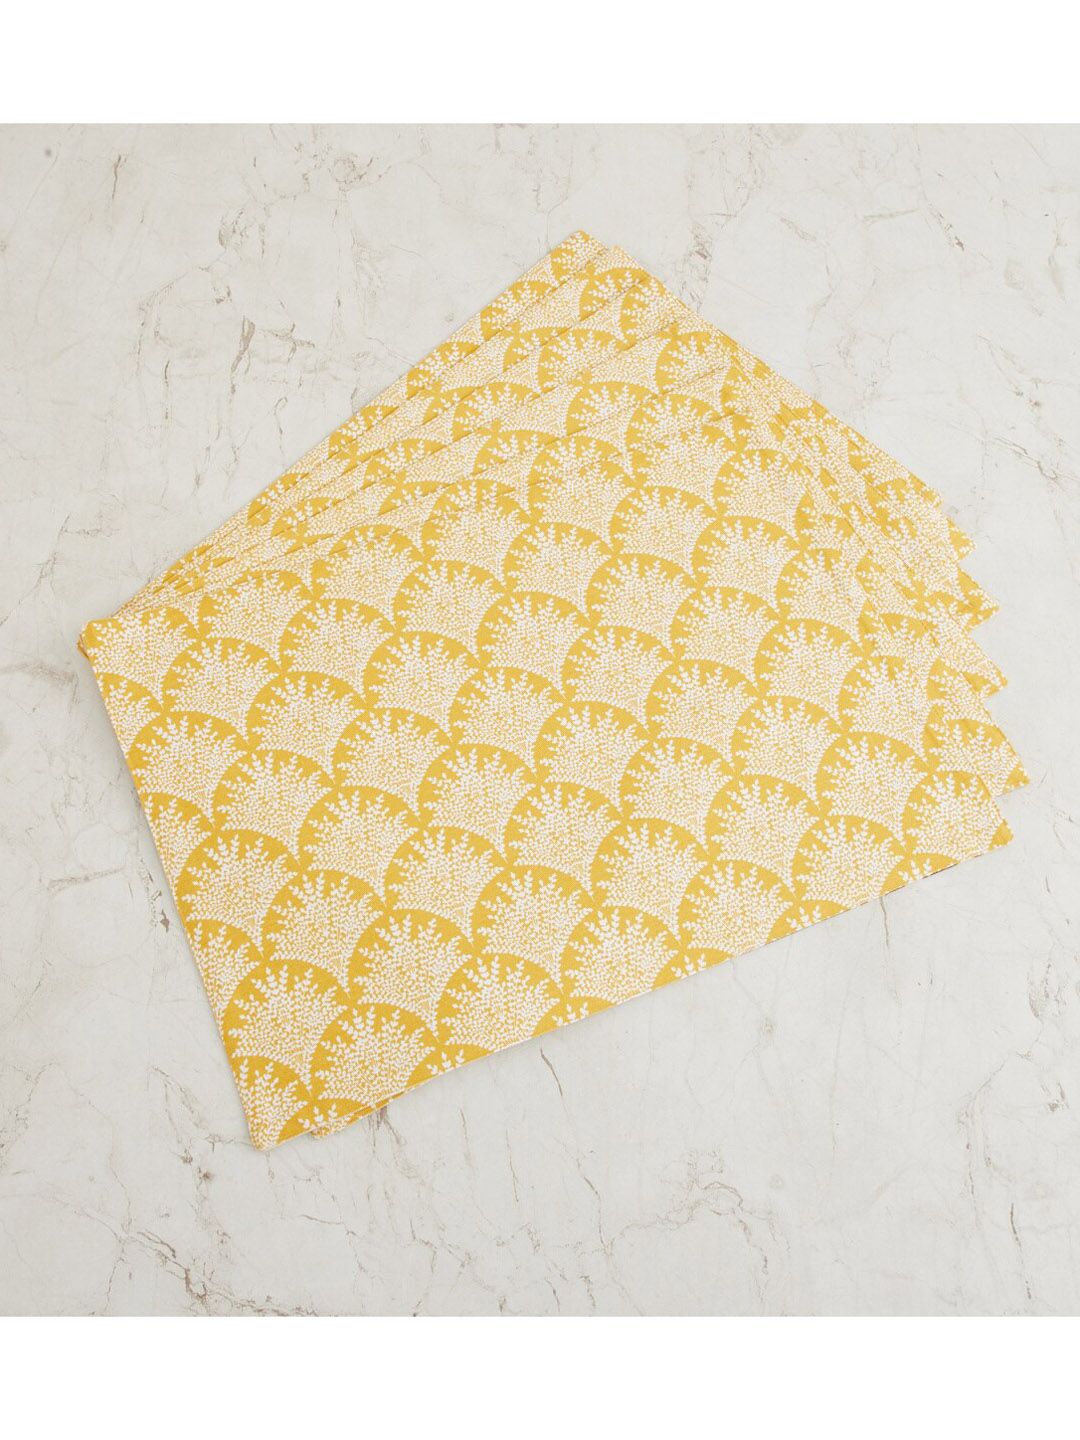 Home Centre Set Of 6 Yellow Corsica Persian Ochre Printed Cotton Reversible Placemats Price in India